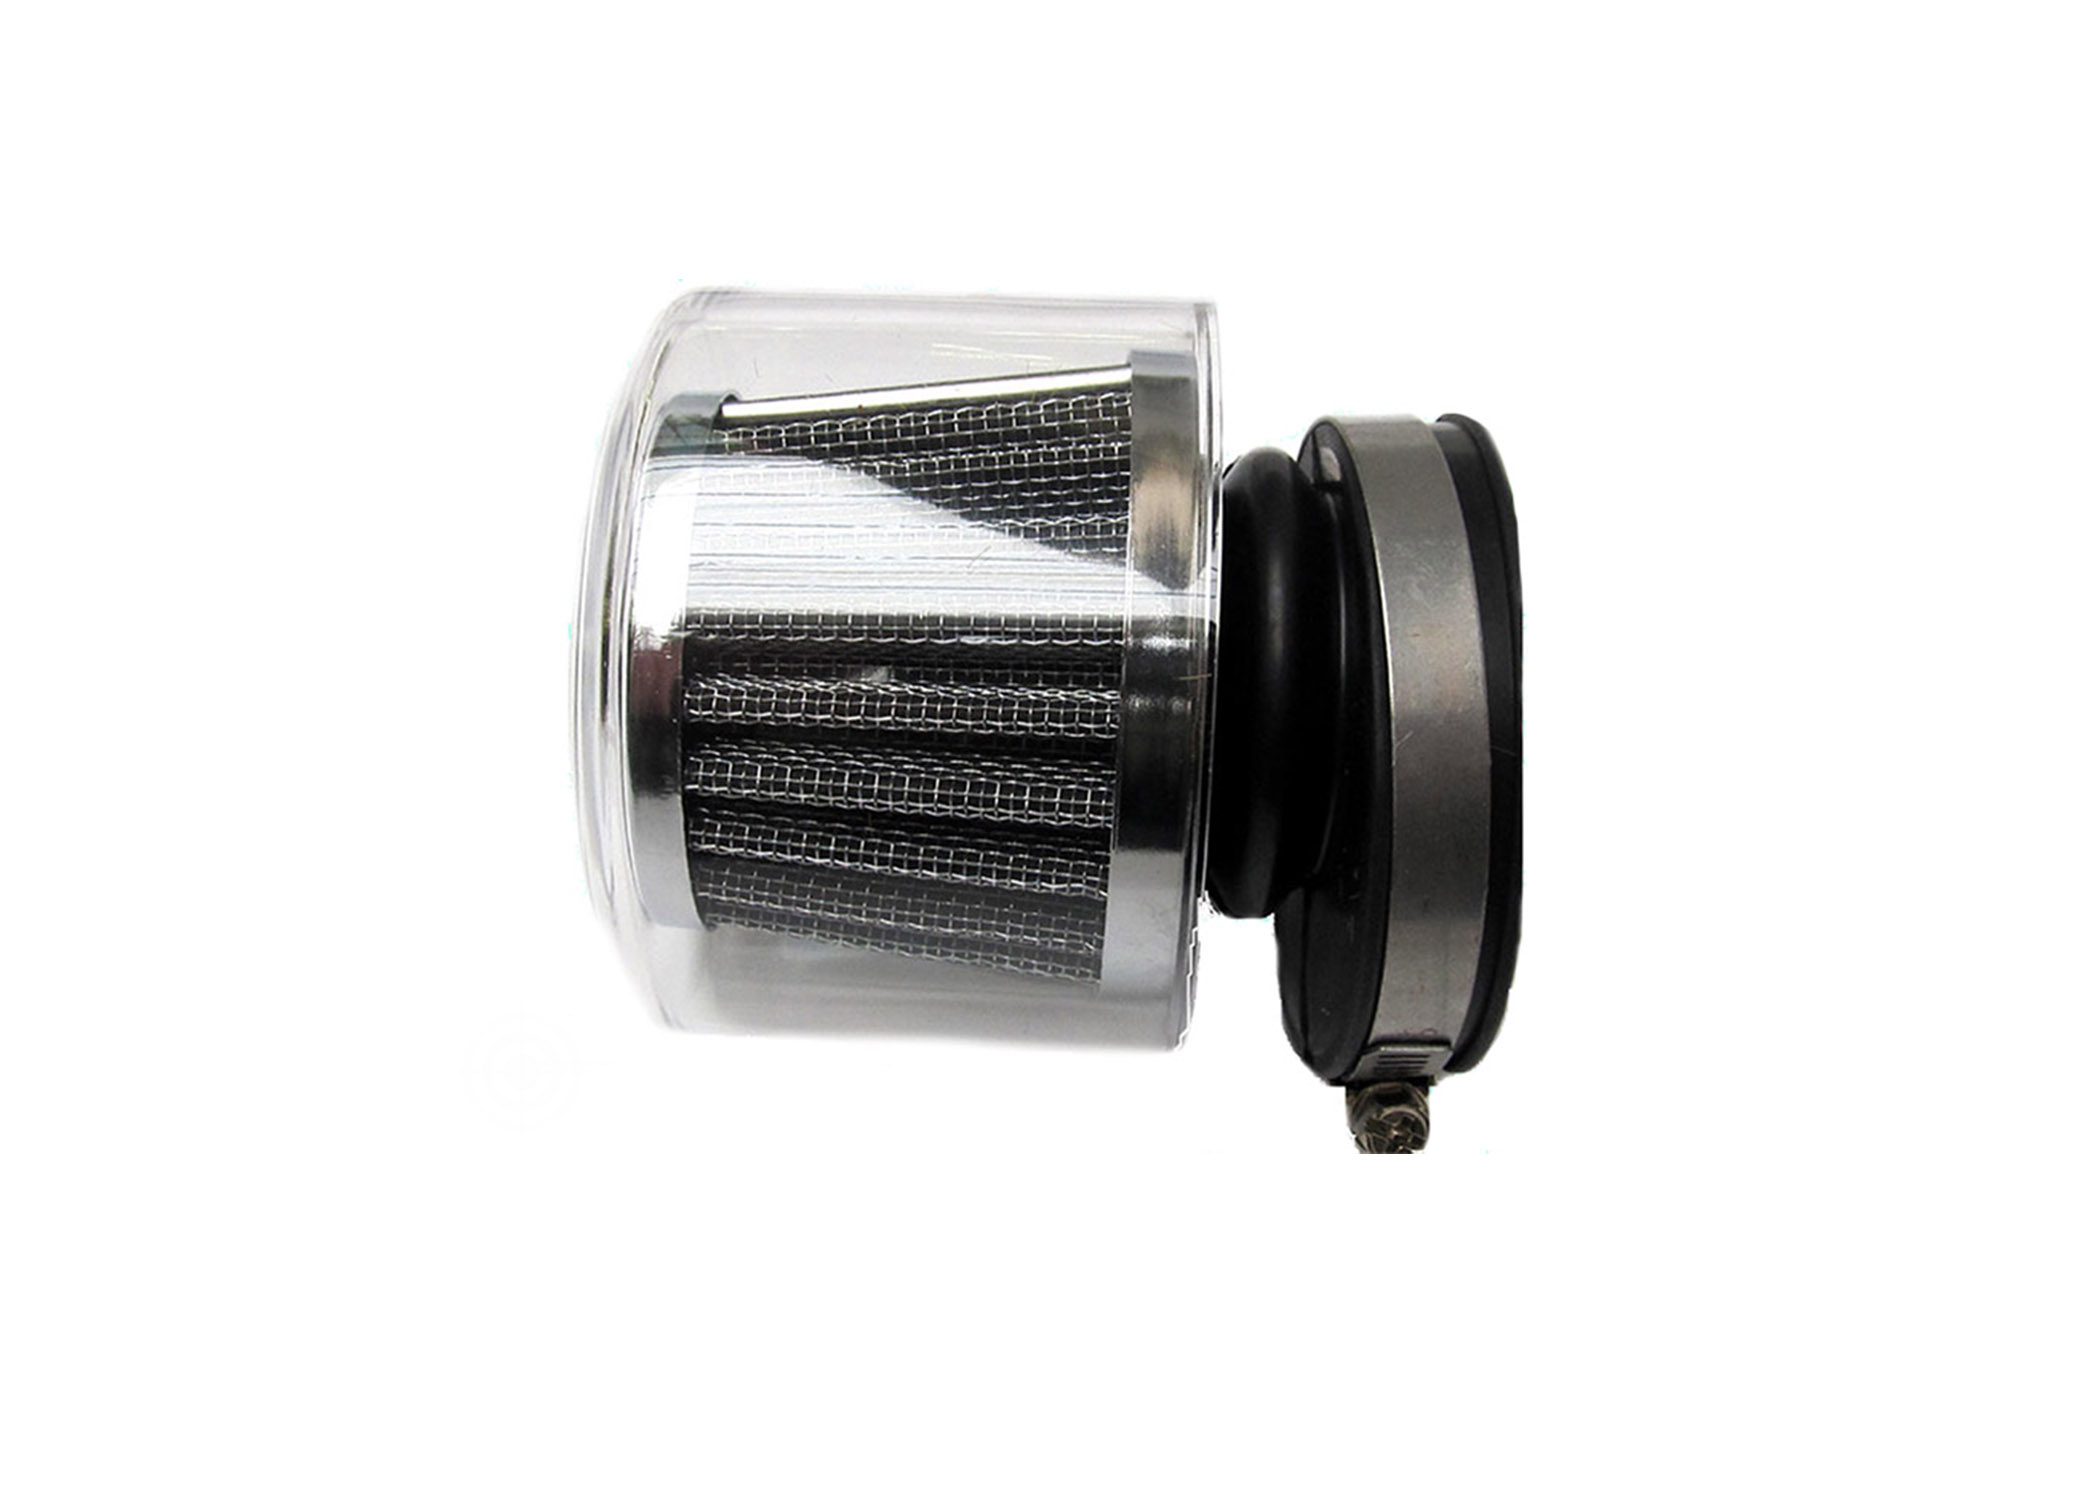 TOMOS/UNIVERSAL/PUCH MAXI powerfilter59-60 mm for SHA carburator FILTER